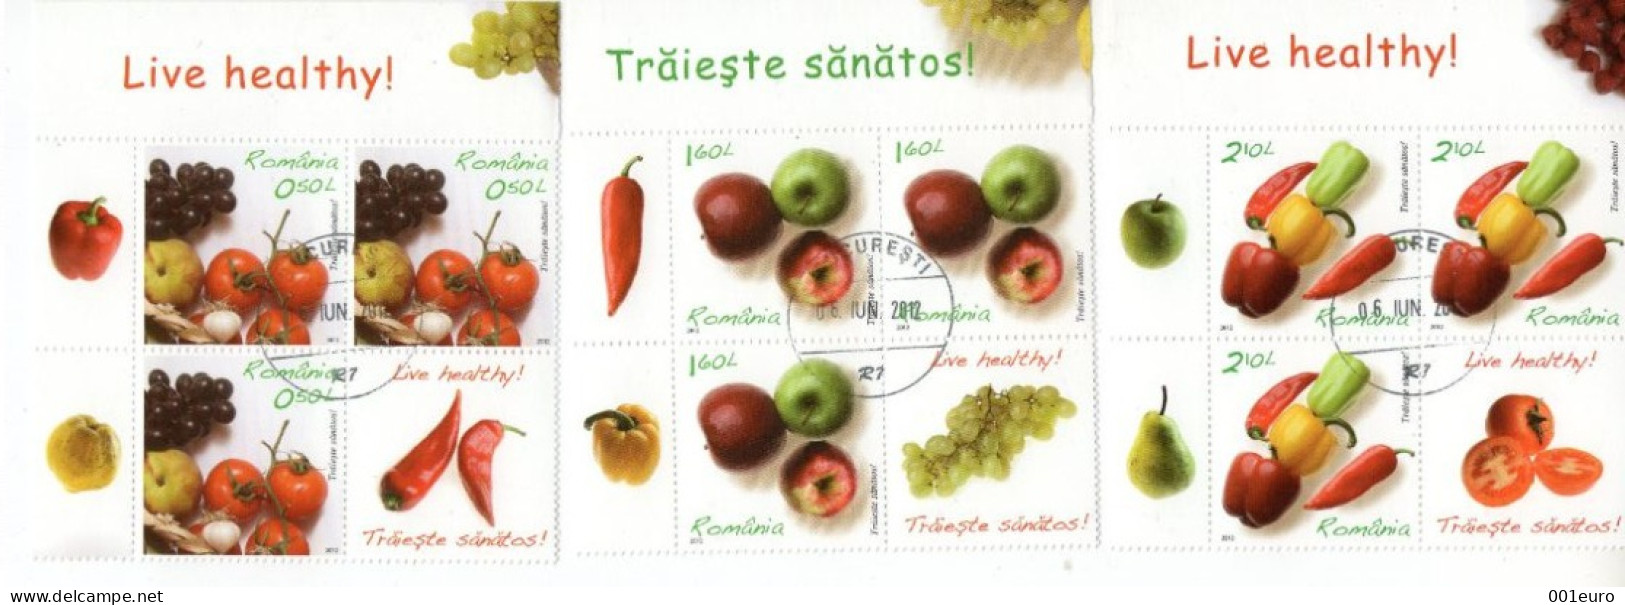 ROMANIA 2012: LIVE HEALTHY! FRUITS & VEGETABLES, Used Stamps X 3 + Vignettes - Registered Shipping! - Used Stamps